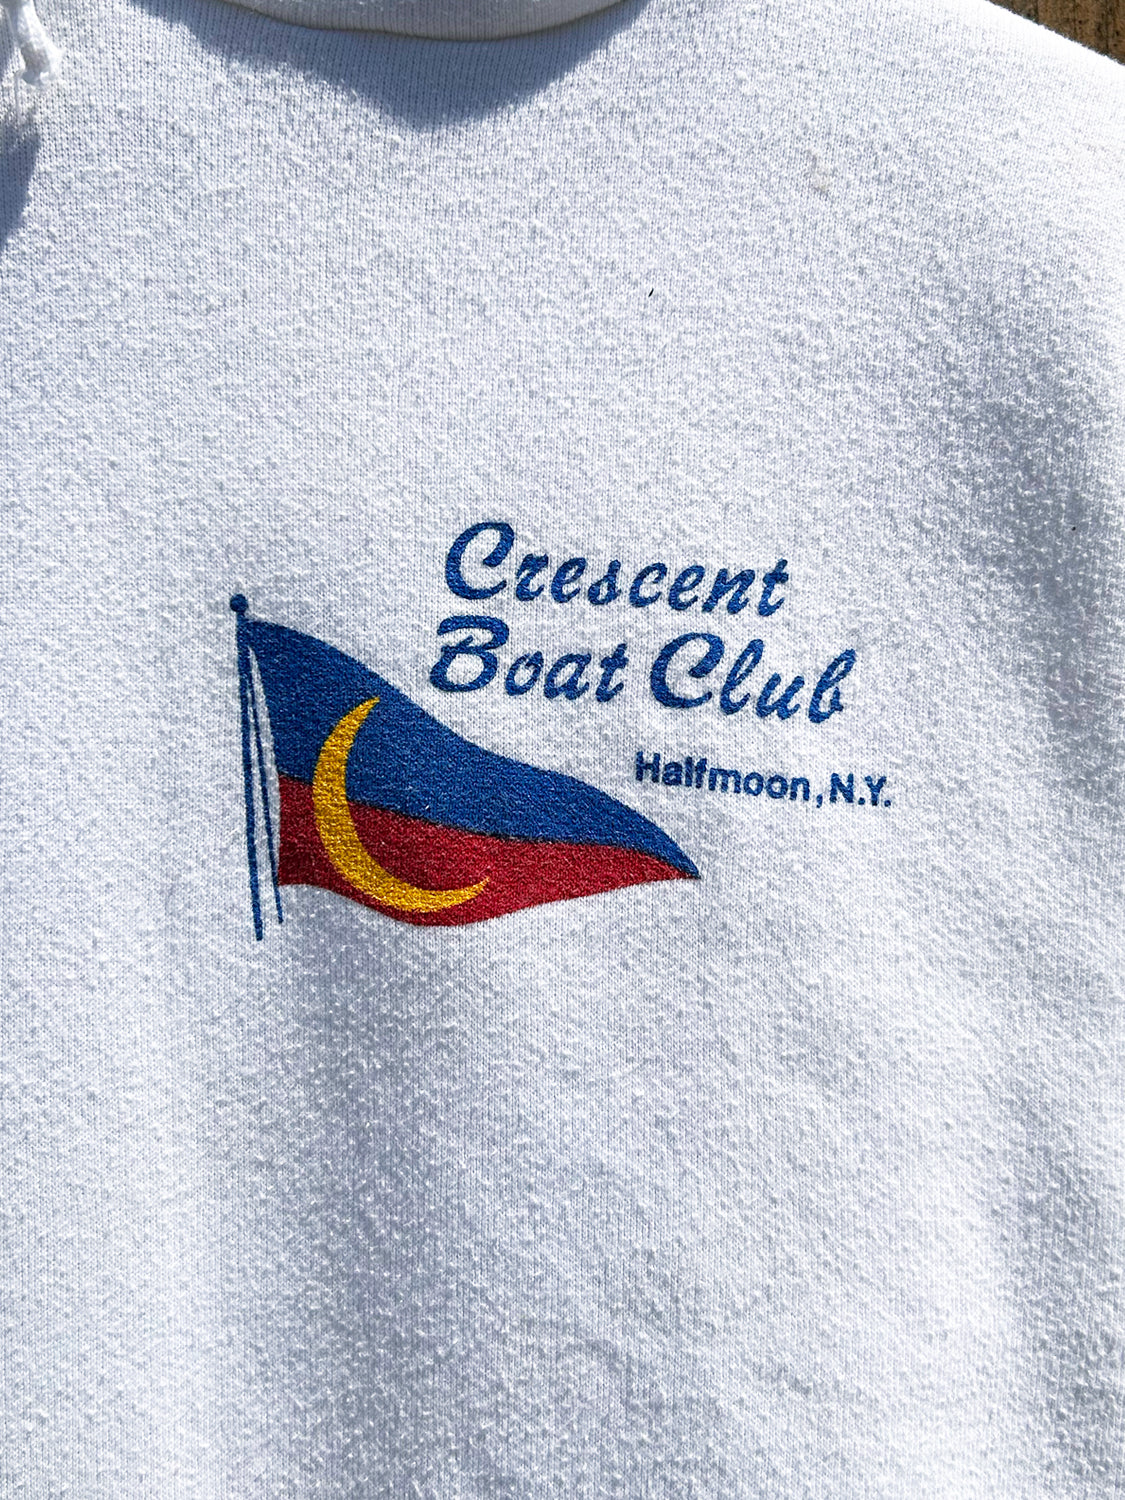 Crescent Boat Club Hoodie - 1990s